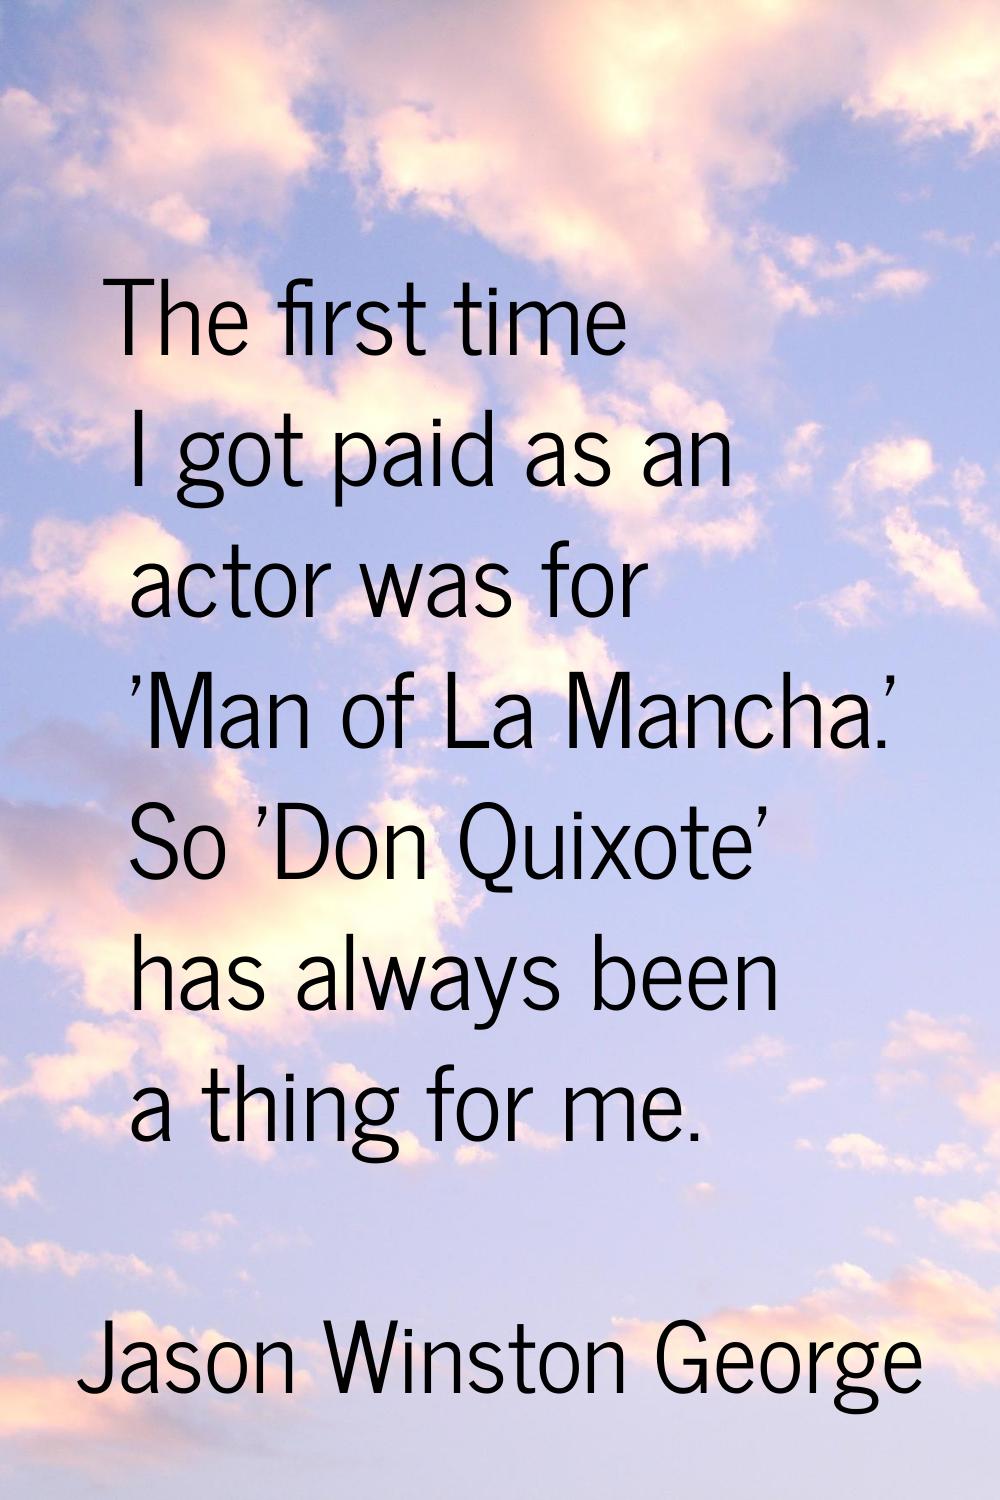 The first time I got paid as an actor was for 'Man of La Mancha.' So 'Don Quixote' has always been 